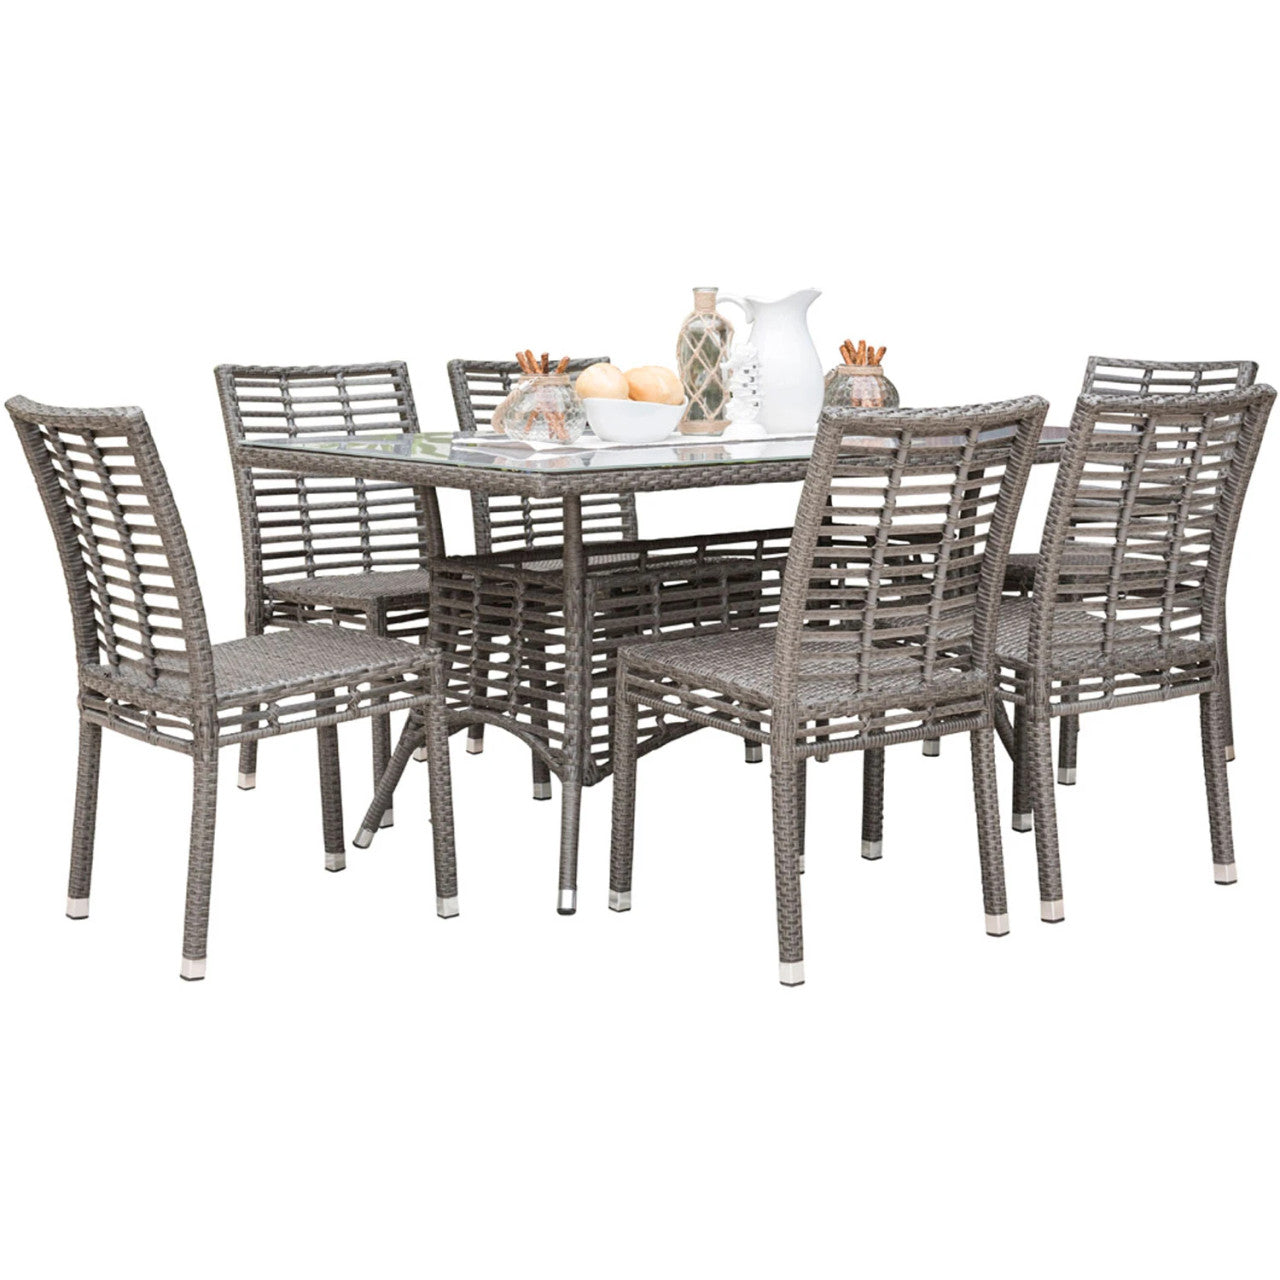 Panama Jack Graphite 7 PC Side Chairs Dining Set with Cushions